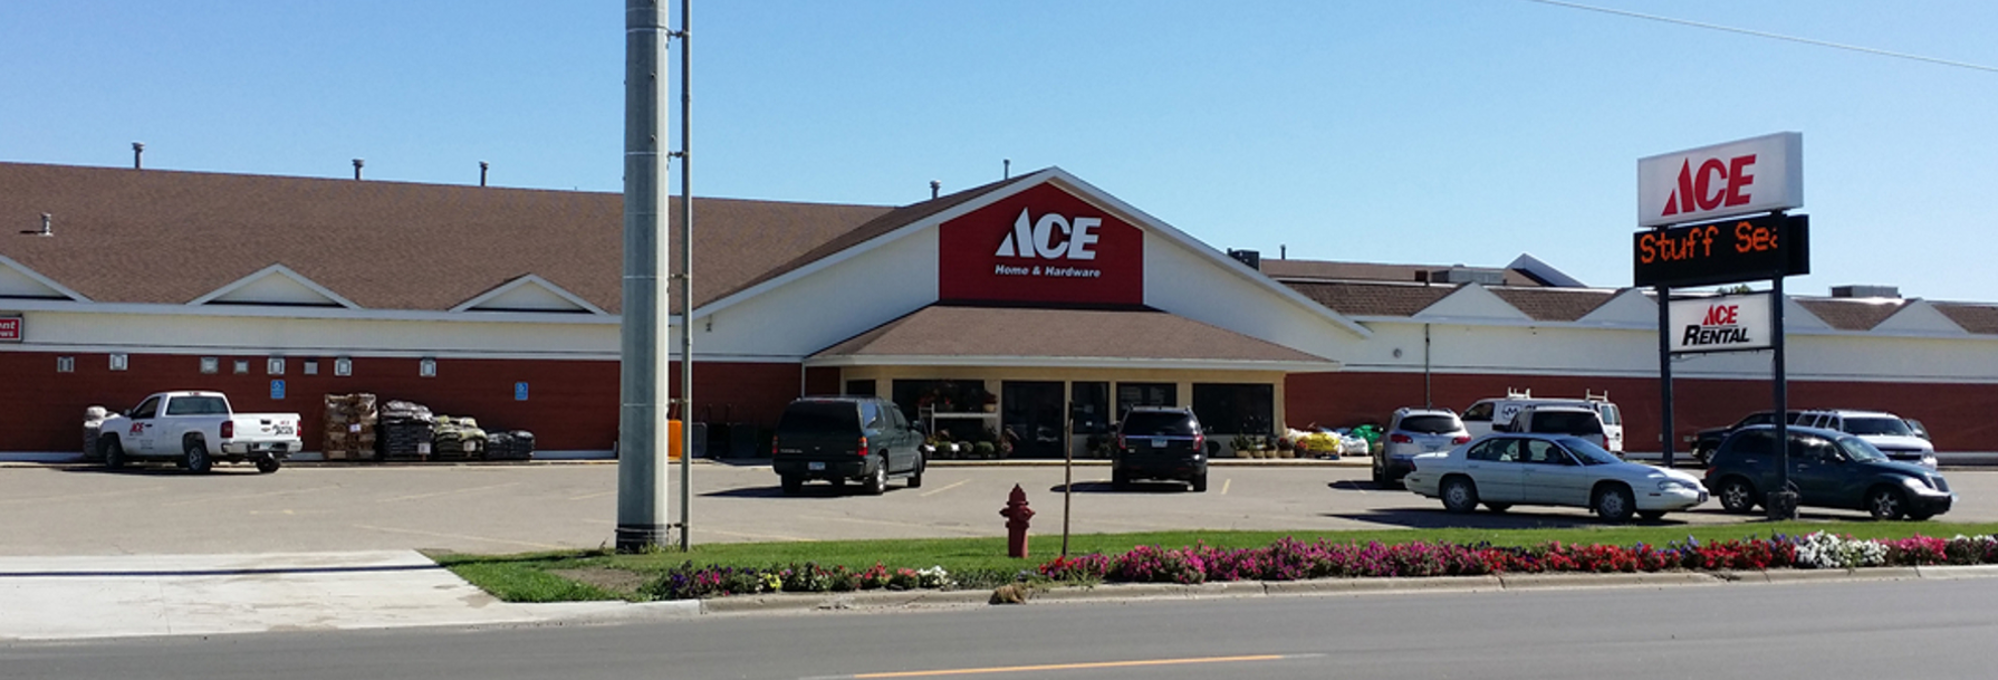 Ace Home & Hardware in Marshall, MN